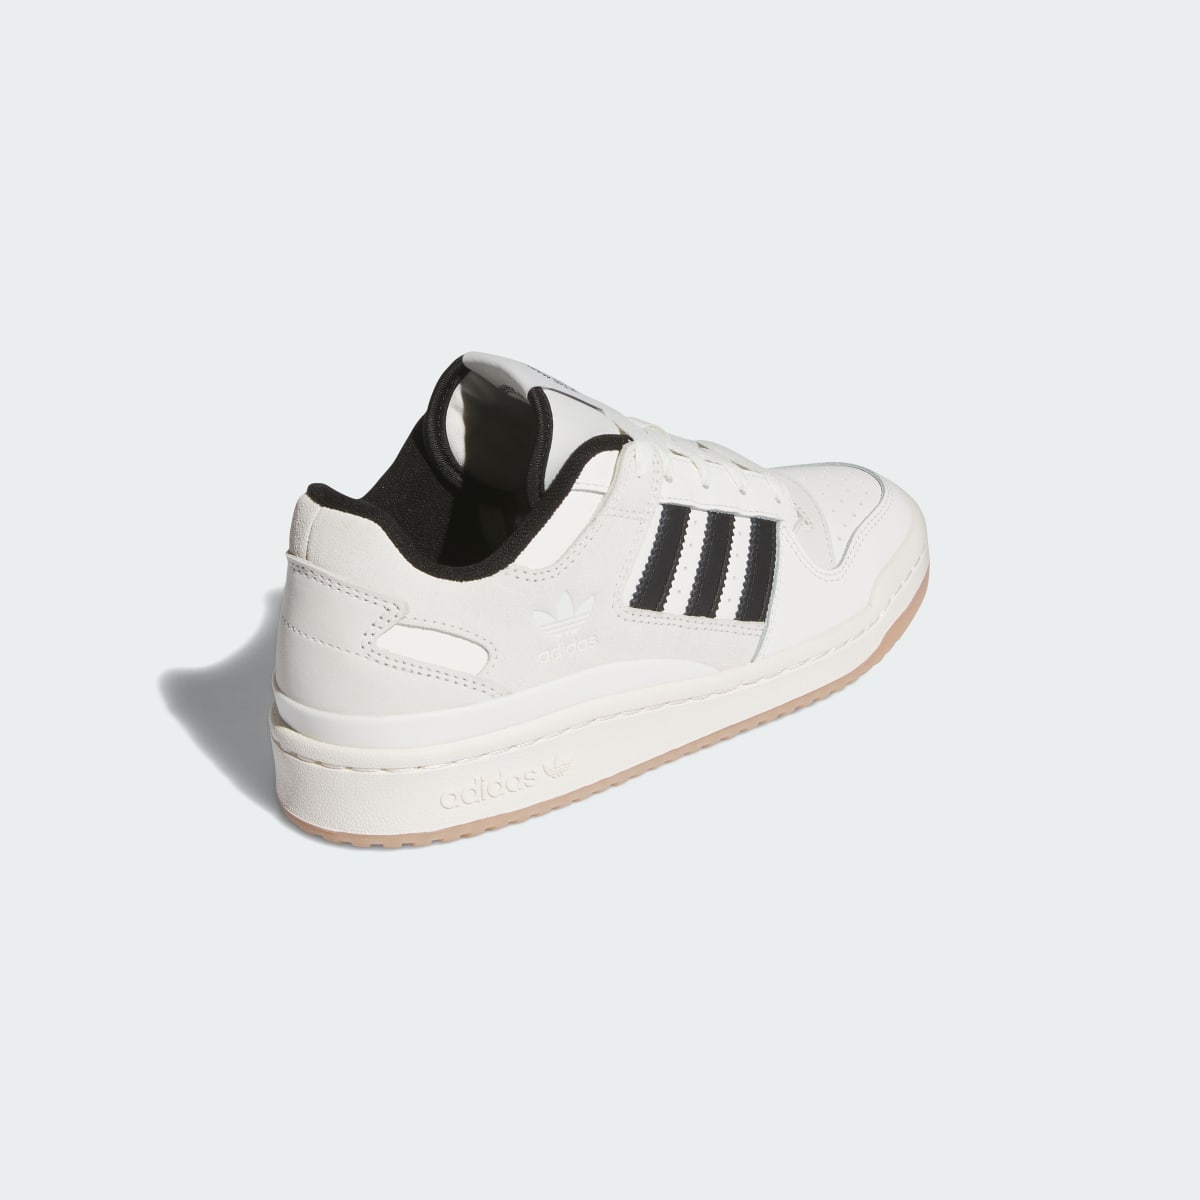 Adidas Forum Low Shoes. 6